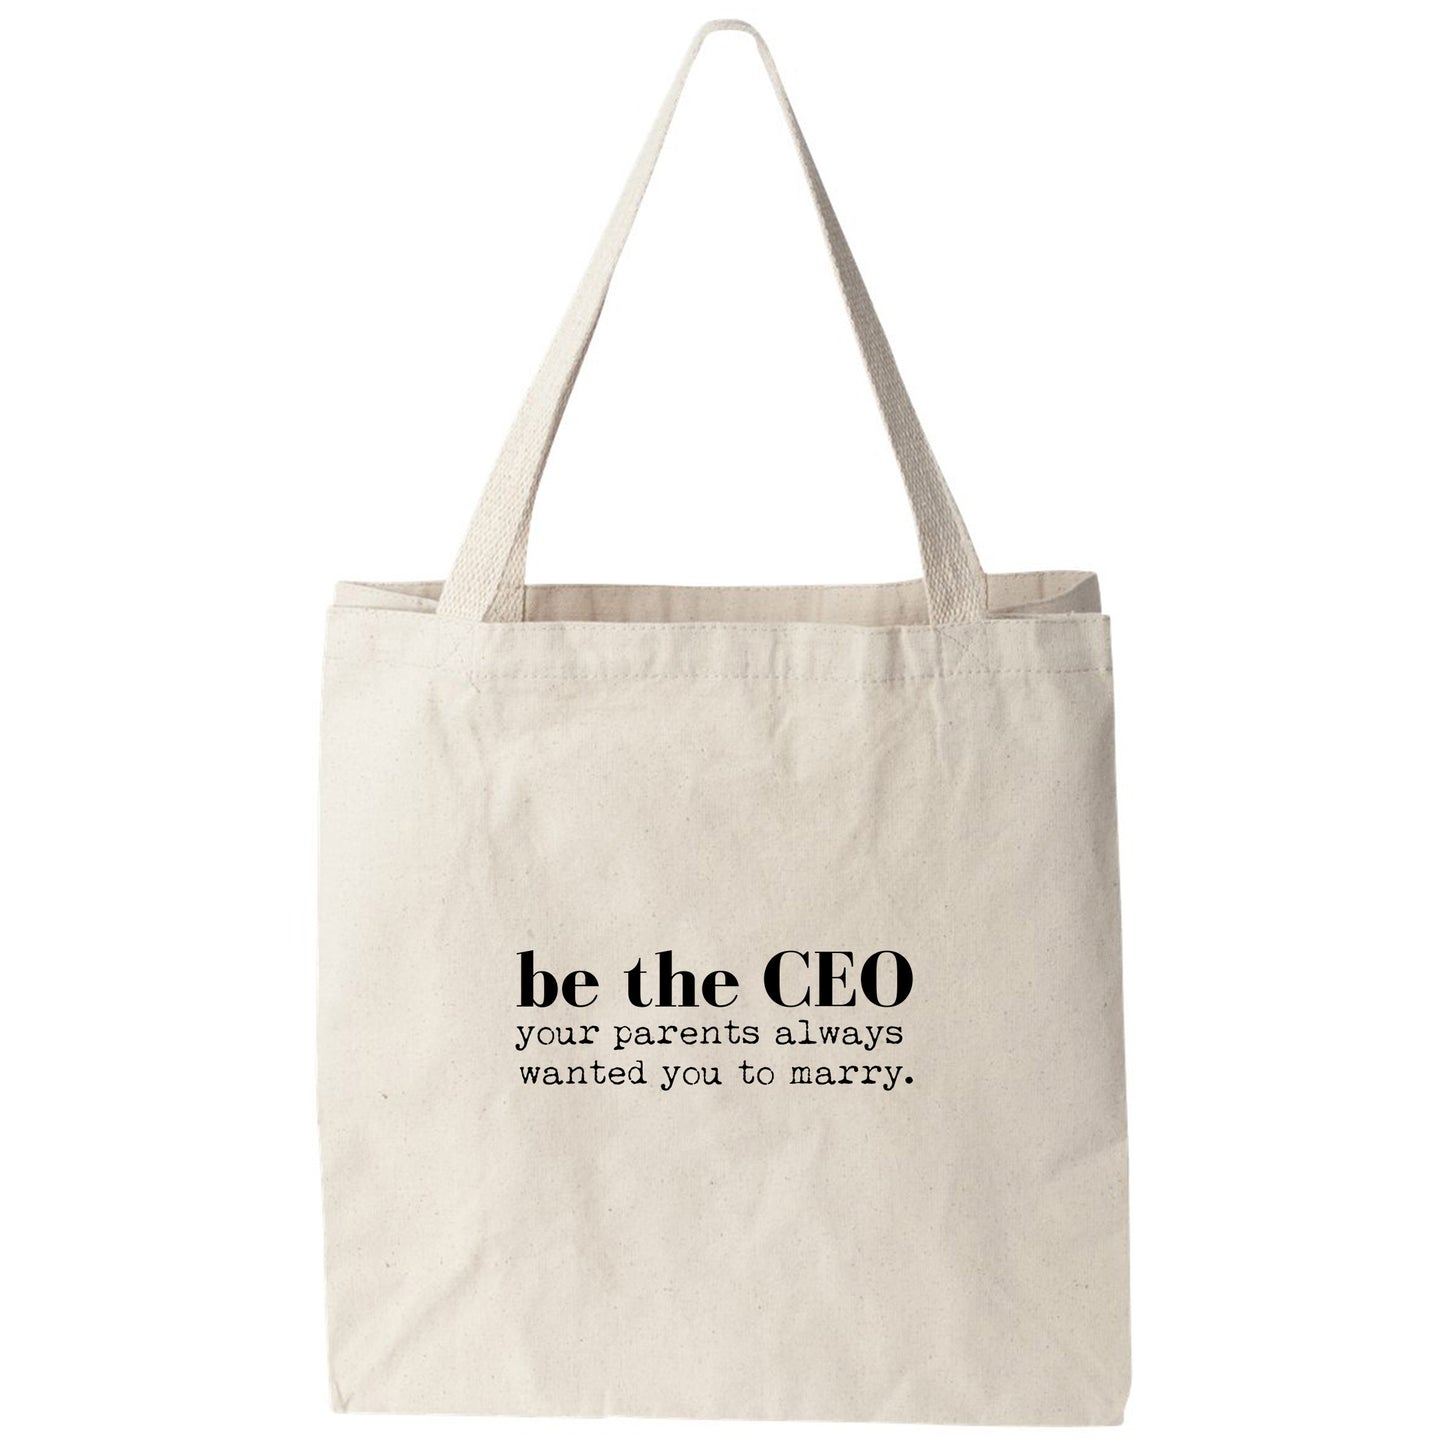 a white tote bag with a quote on it